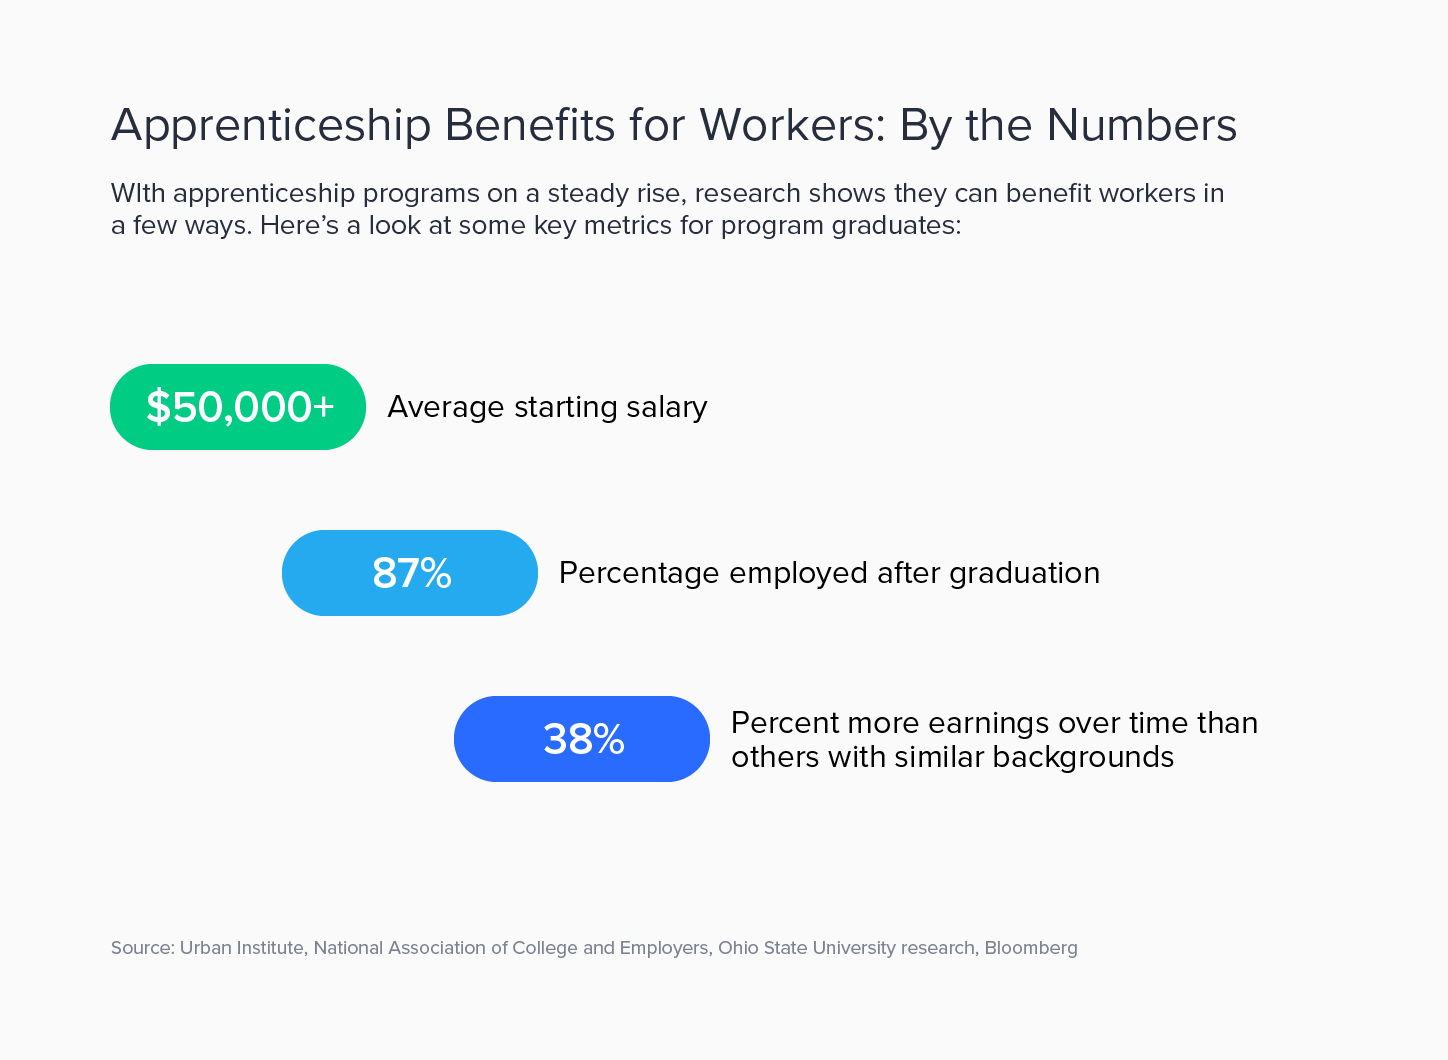 This graphic shows key stats for graduates of apprenticeship programs. It shows that 87% of graduates are employed with an average $50,000 starting salary — and that they earn 38% more over time than others with similar backgrounds.